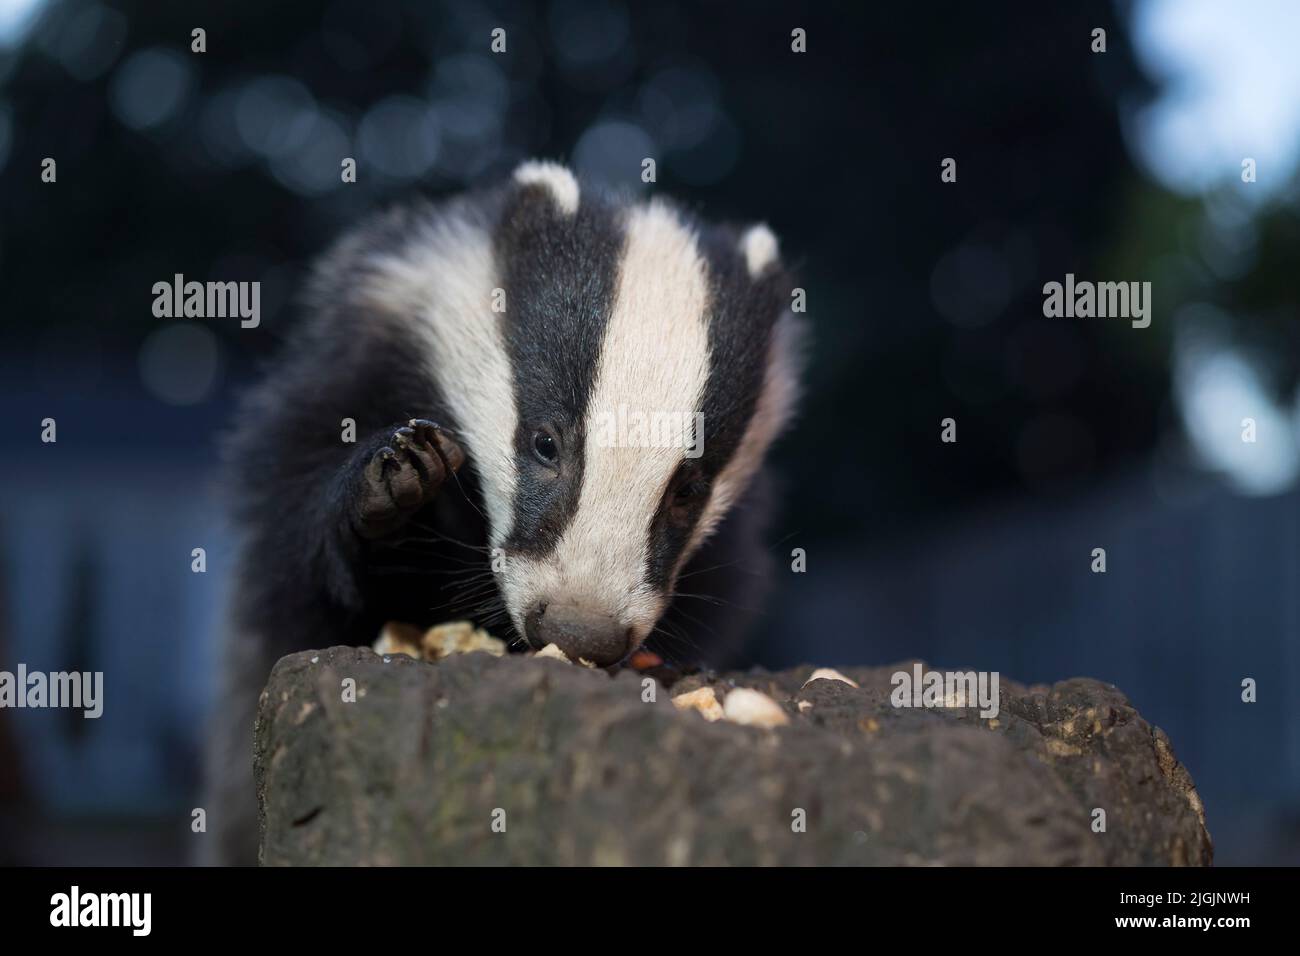 Close, front view of a baby badger cub (Meles meles) eating food on a log in a residential garden with his paw raised. Stock Photo